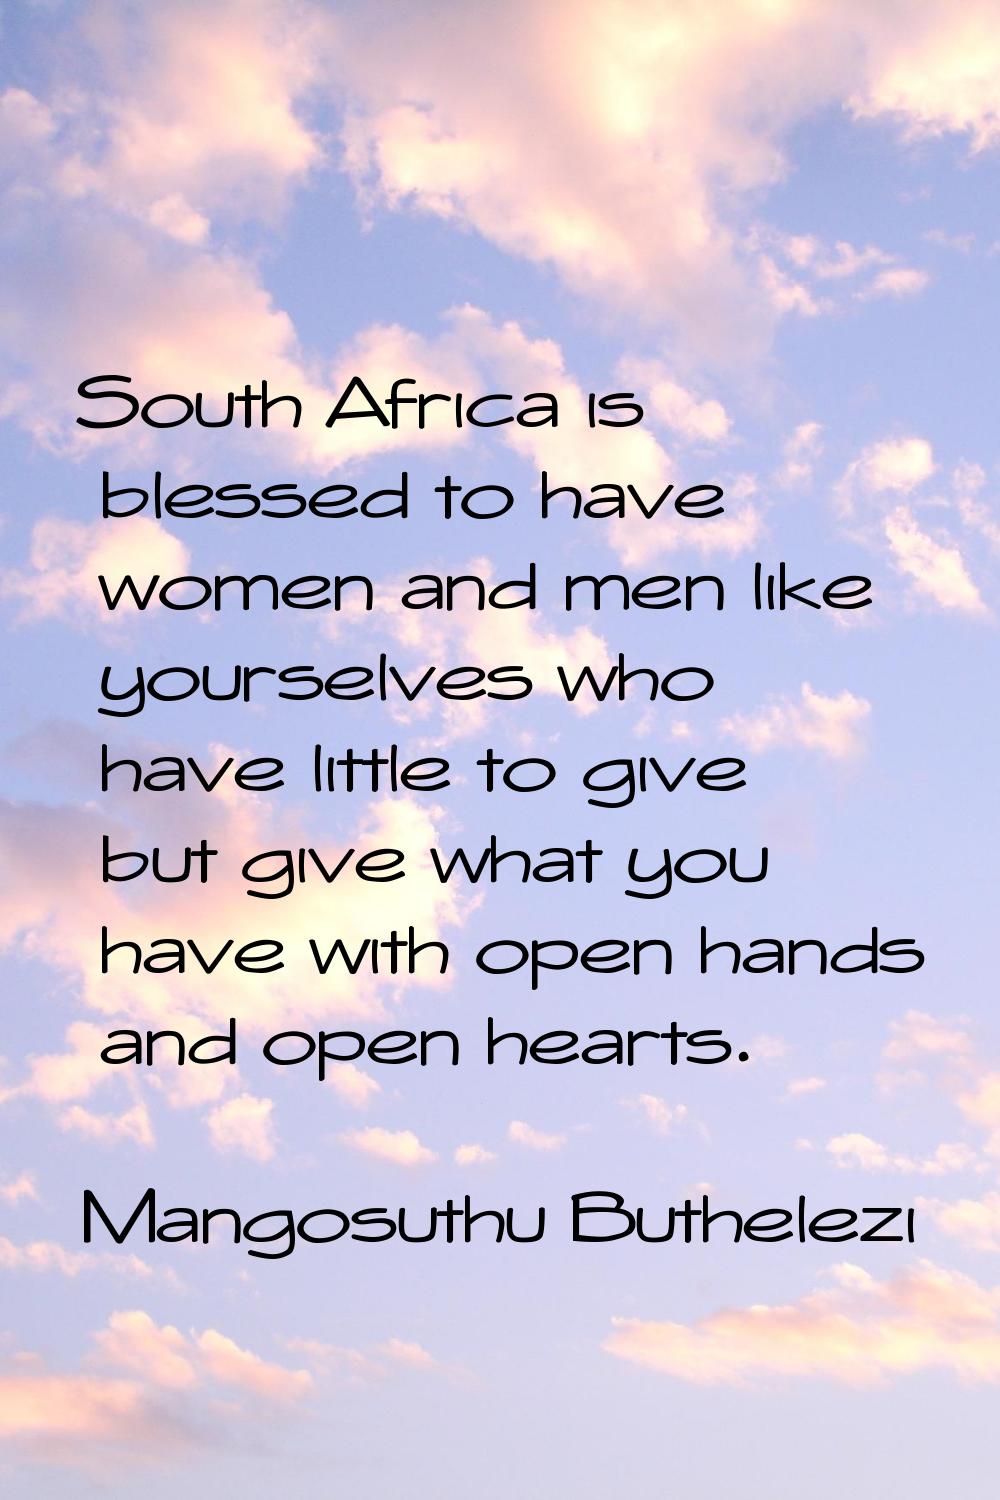 South Africa is blessed to have women and men like yourselves who have little to give but give what